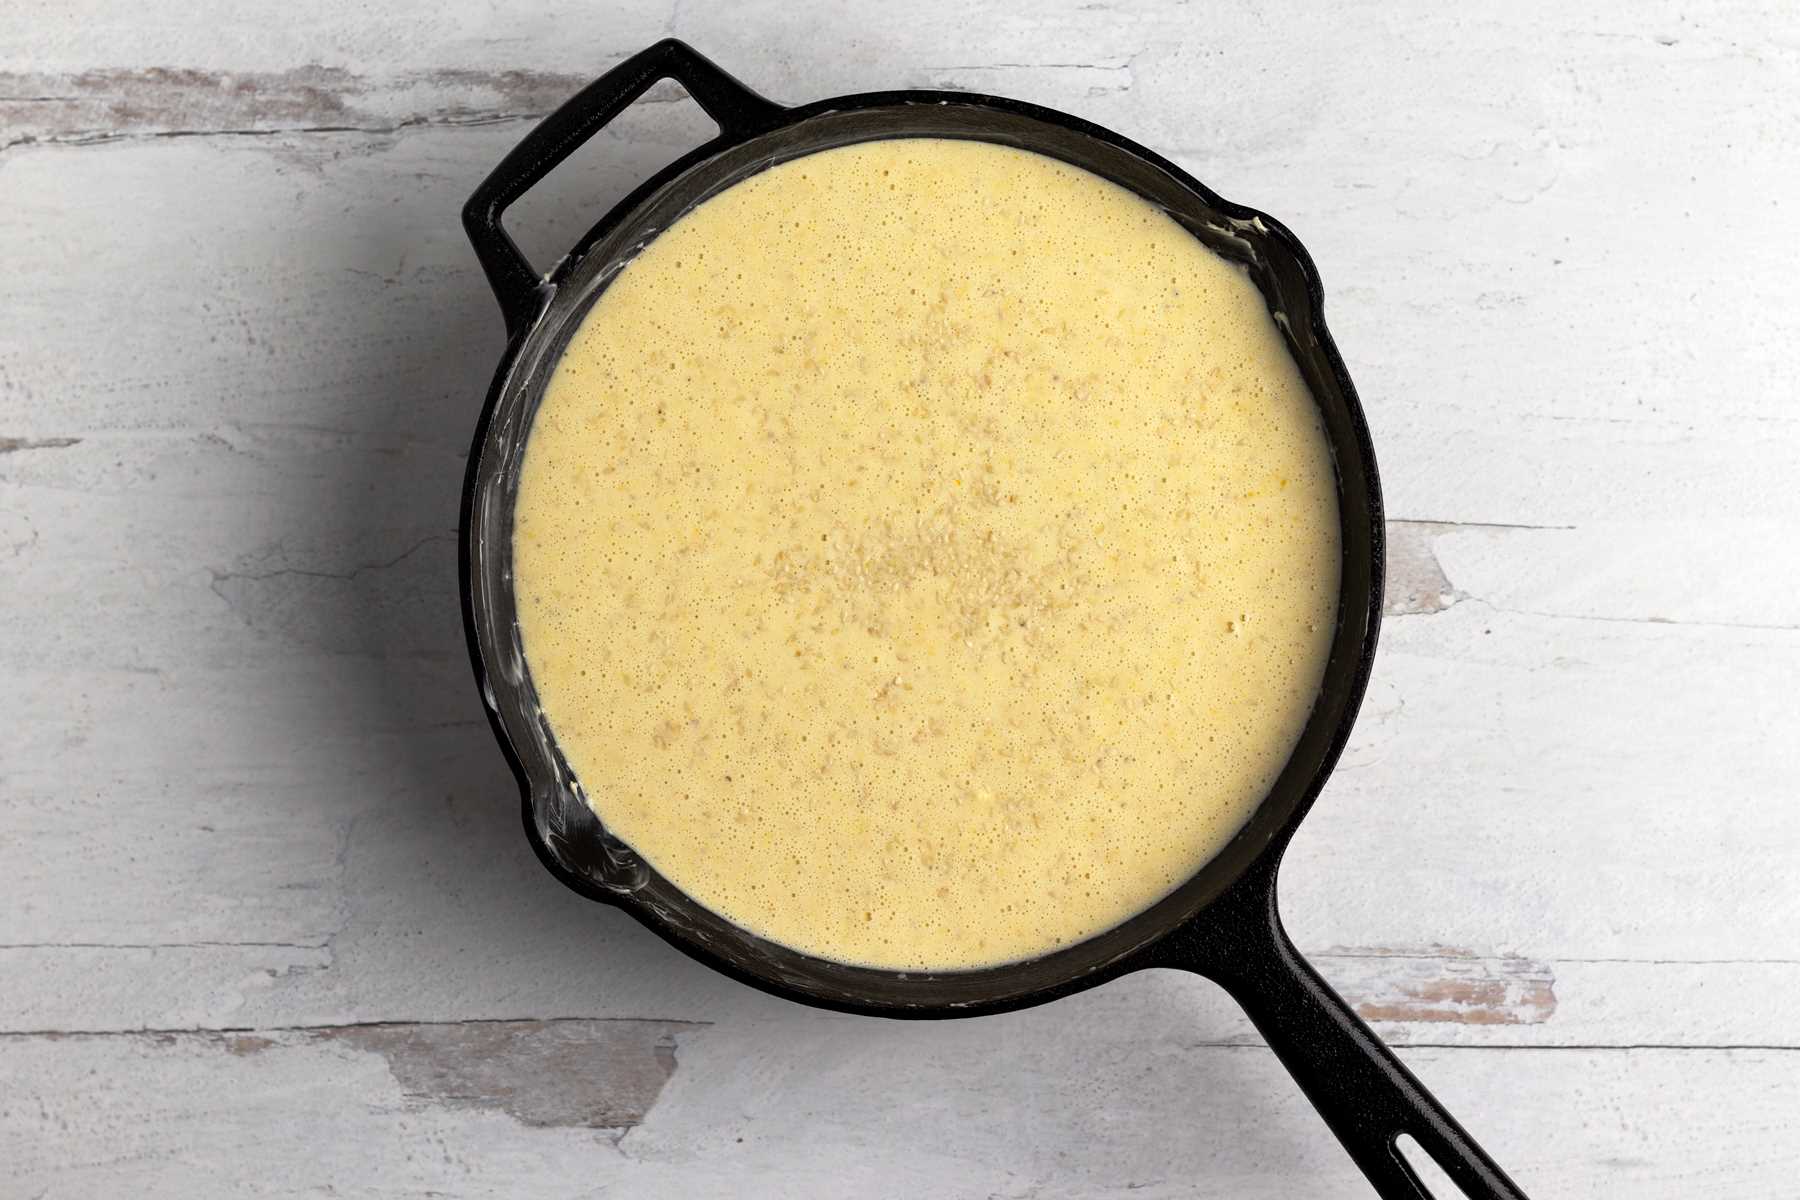 Cornbread ready to bake in a cast iron skillet.